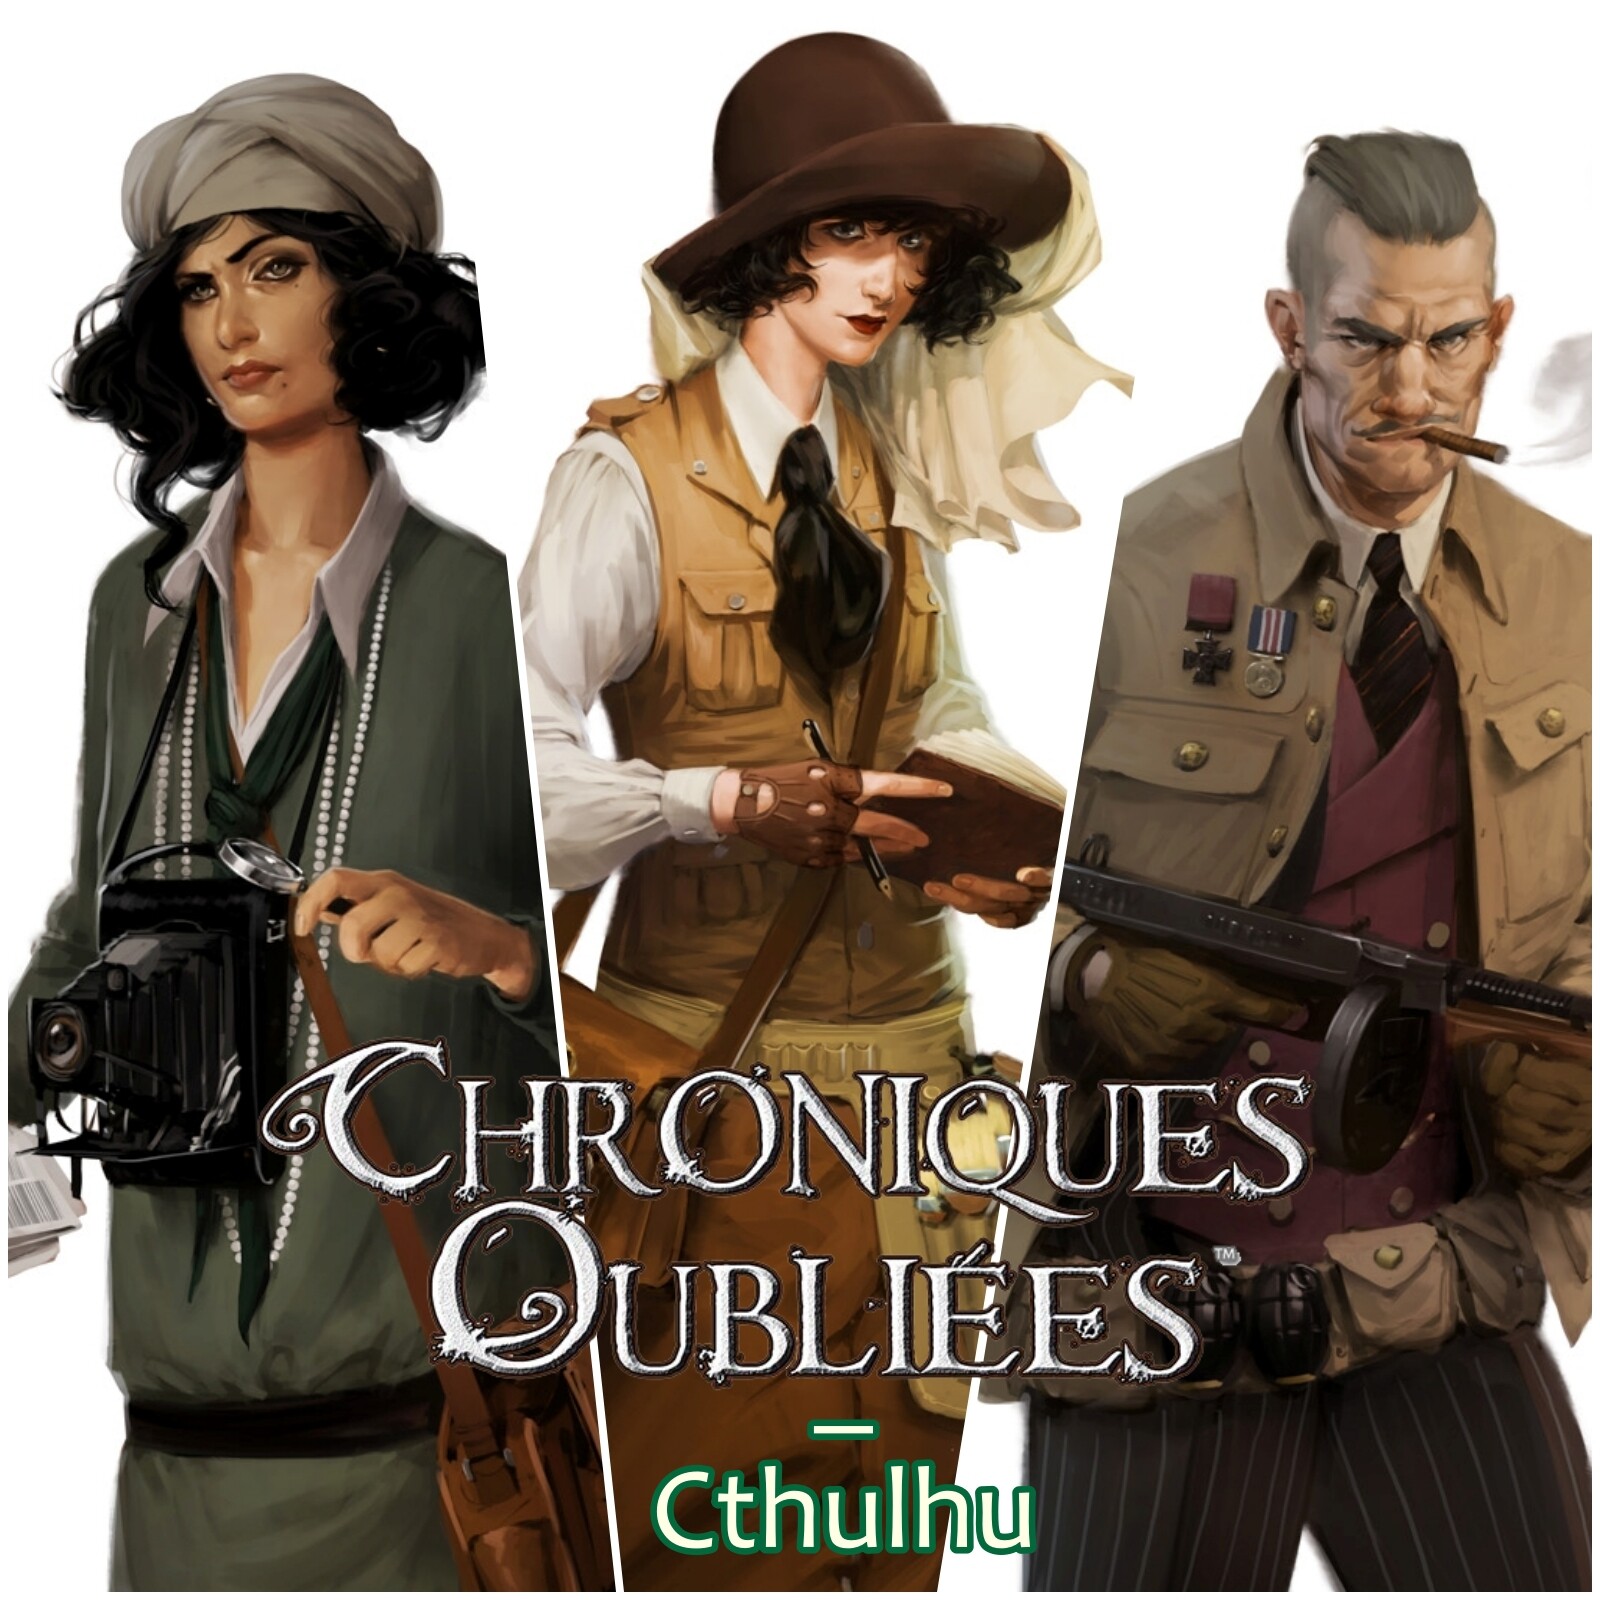 Chroniques Oubliées: Cthulhu - Characters